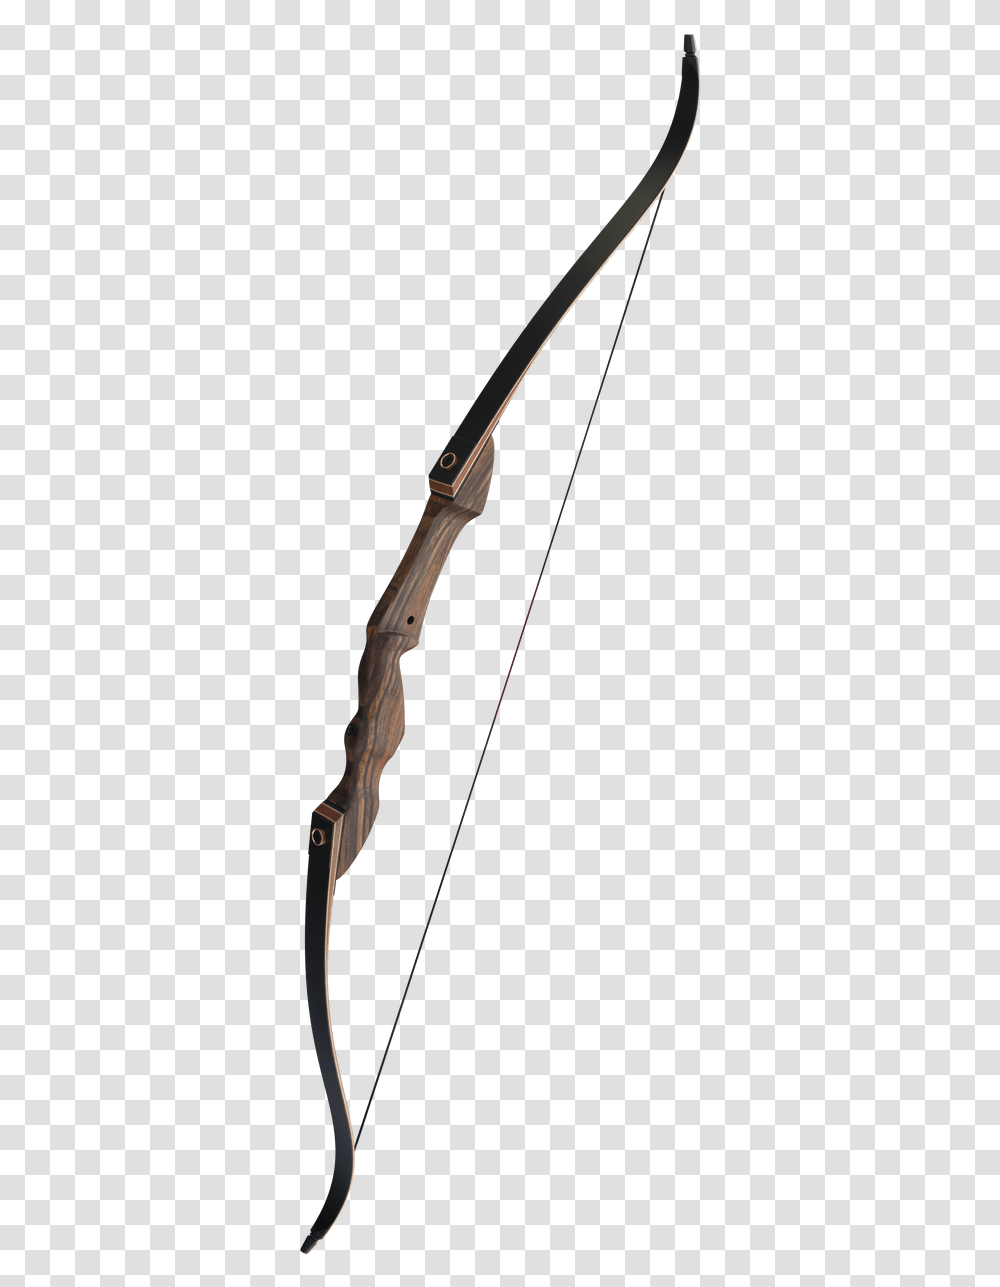 Recurve Bow Takedown Bow Bow And Arrow Archery Longbow, Bronze Transparent Png